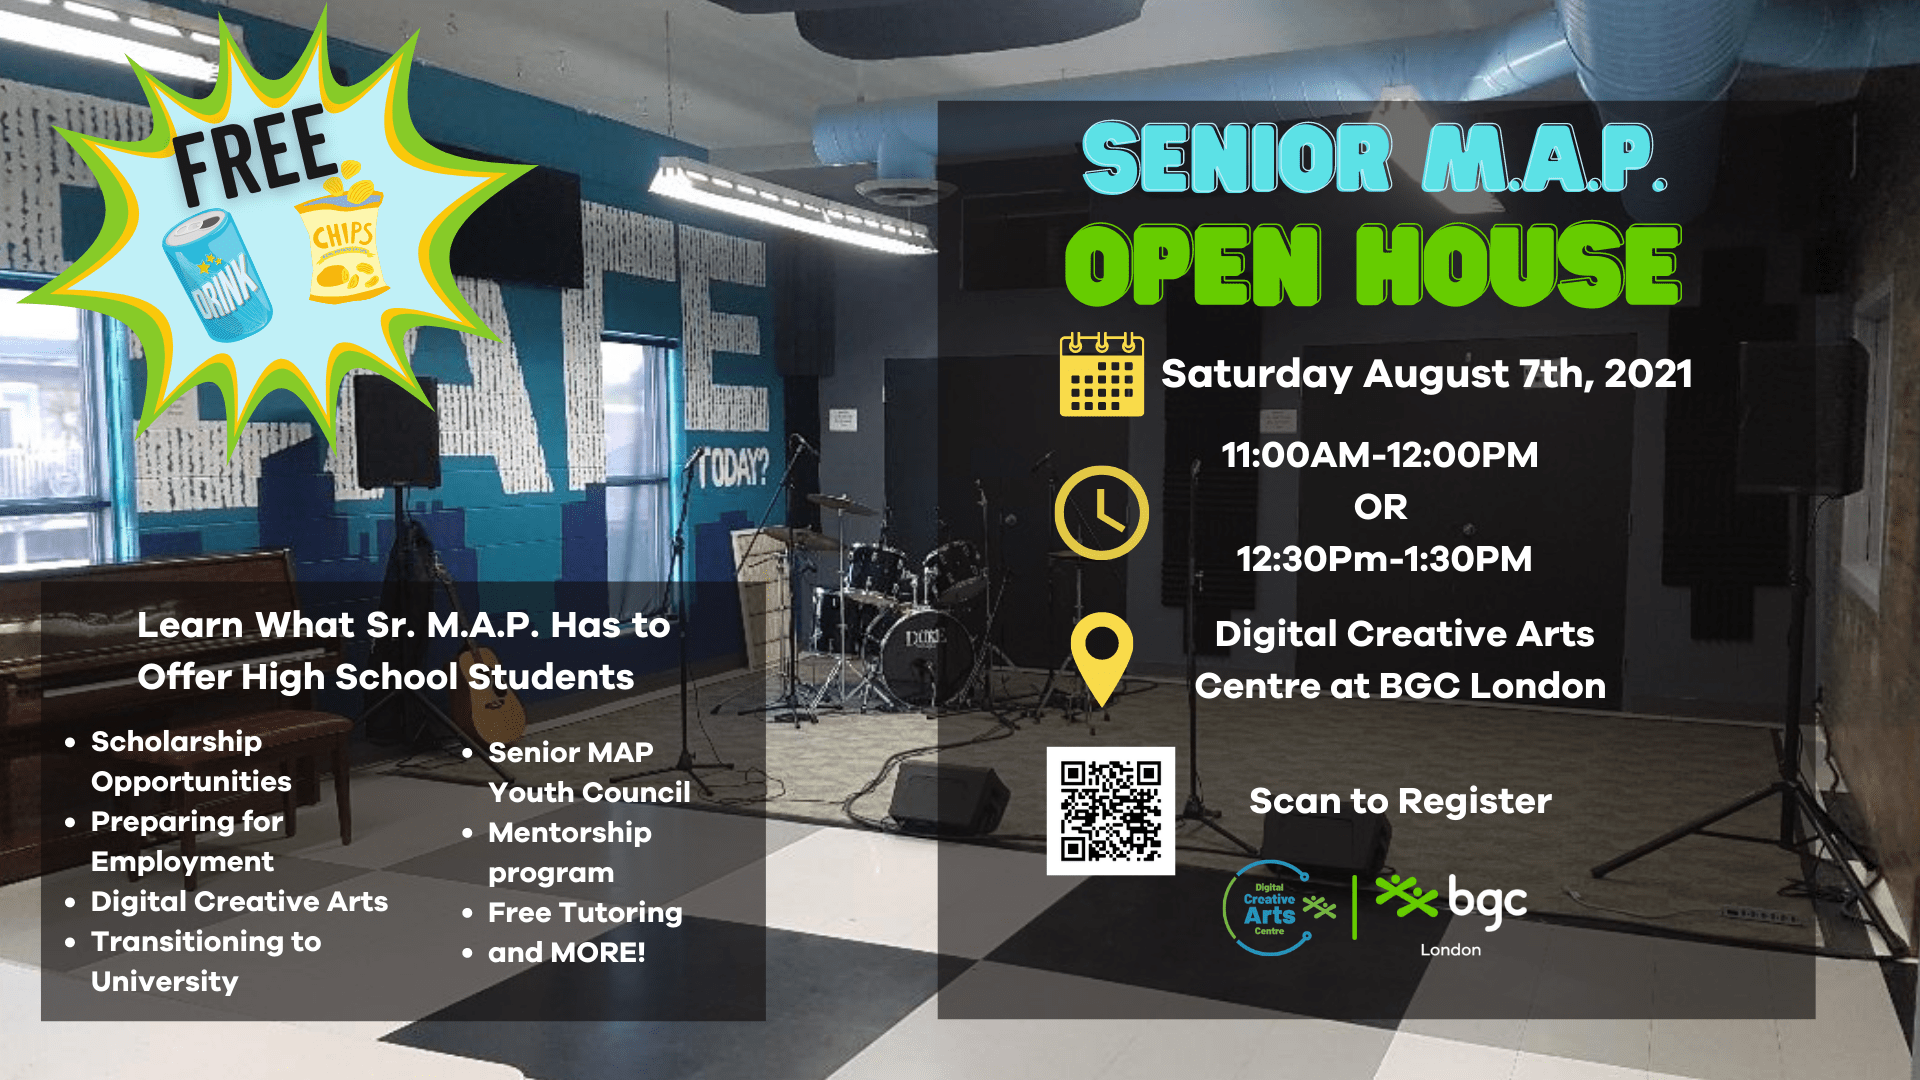 IN-PERSON Senior M.A.P. Open House